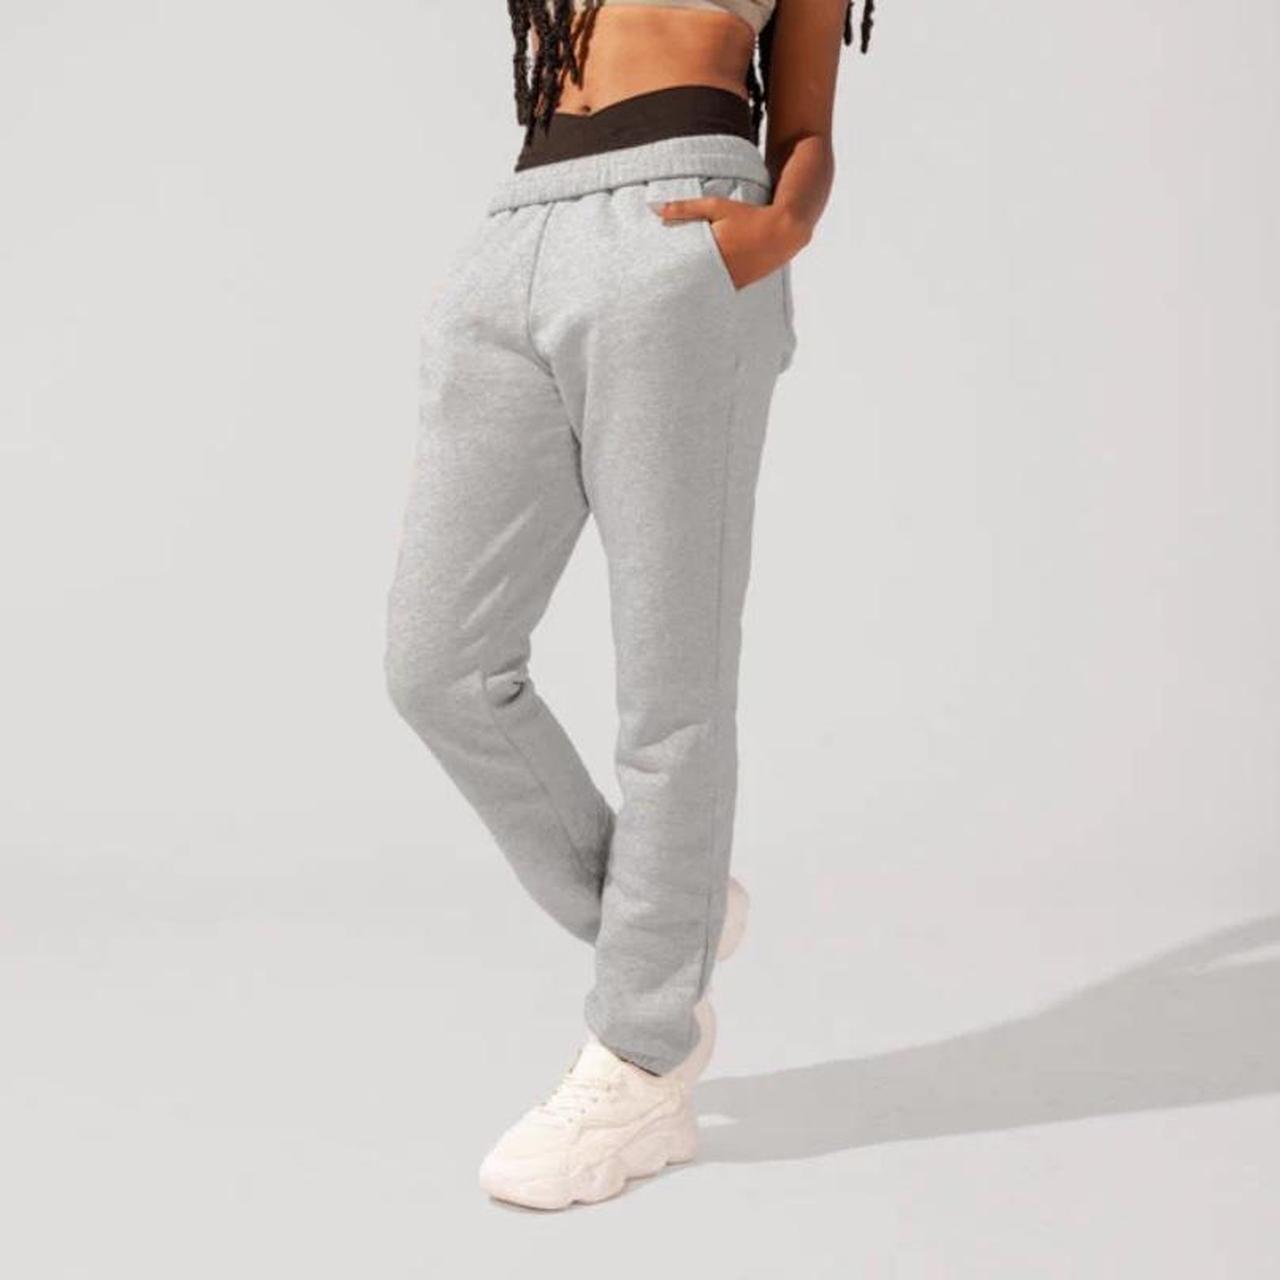 Cloud Rollover Sweatpant - White - 2X / One Size